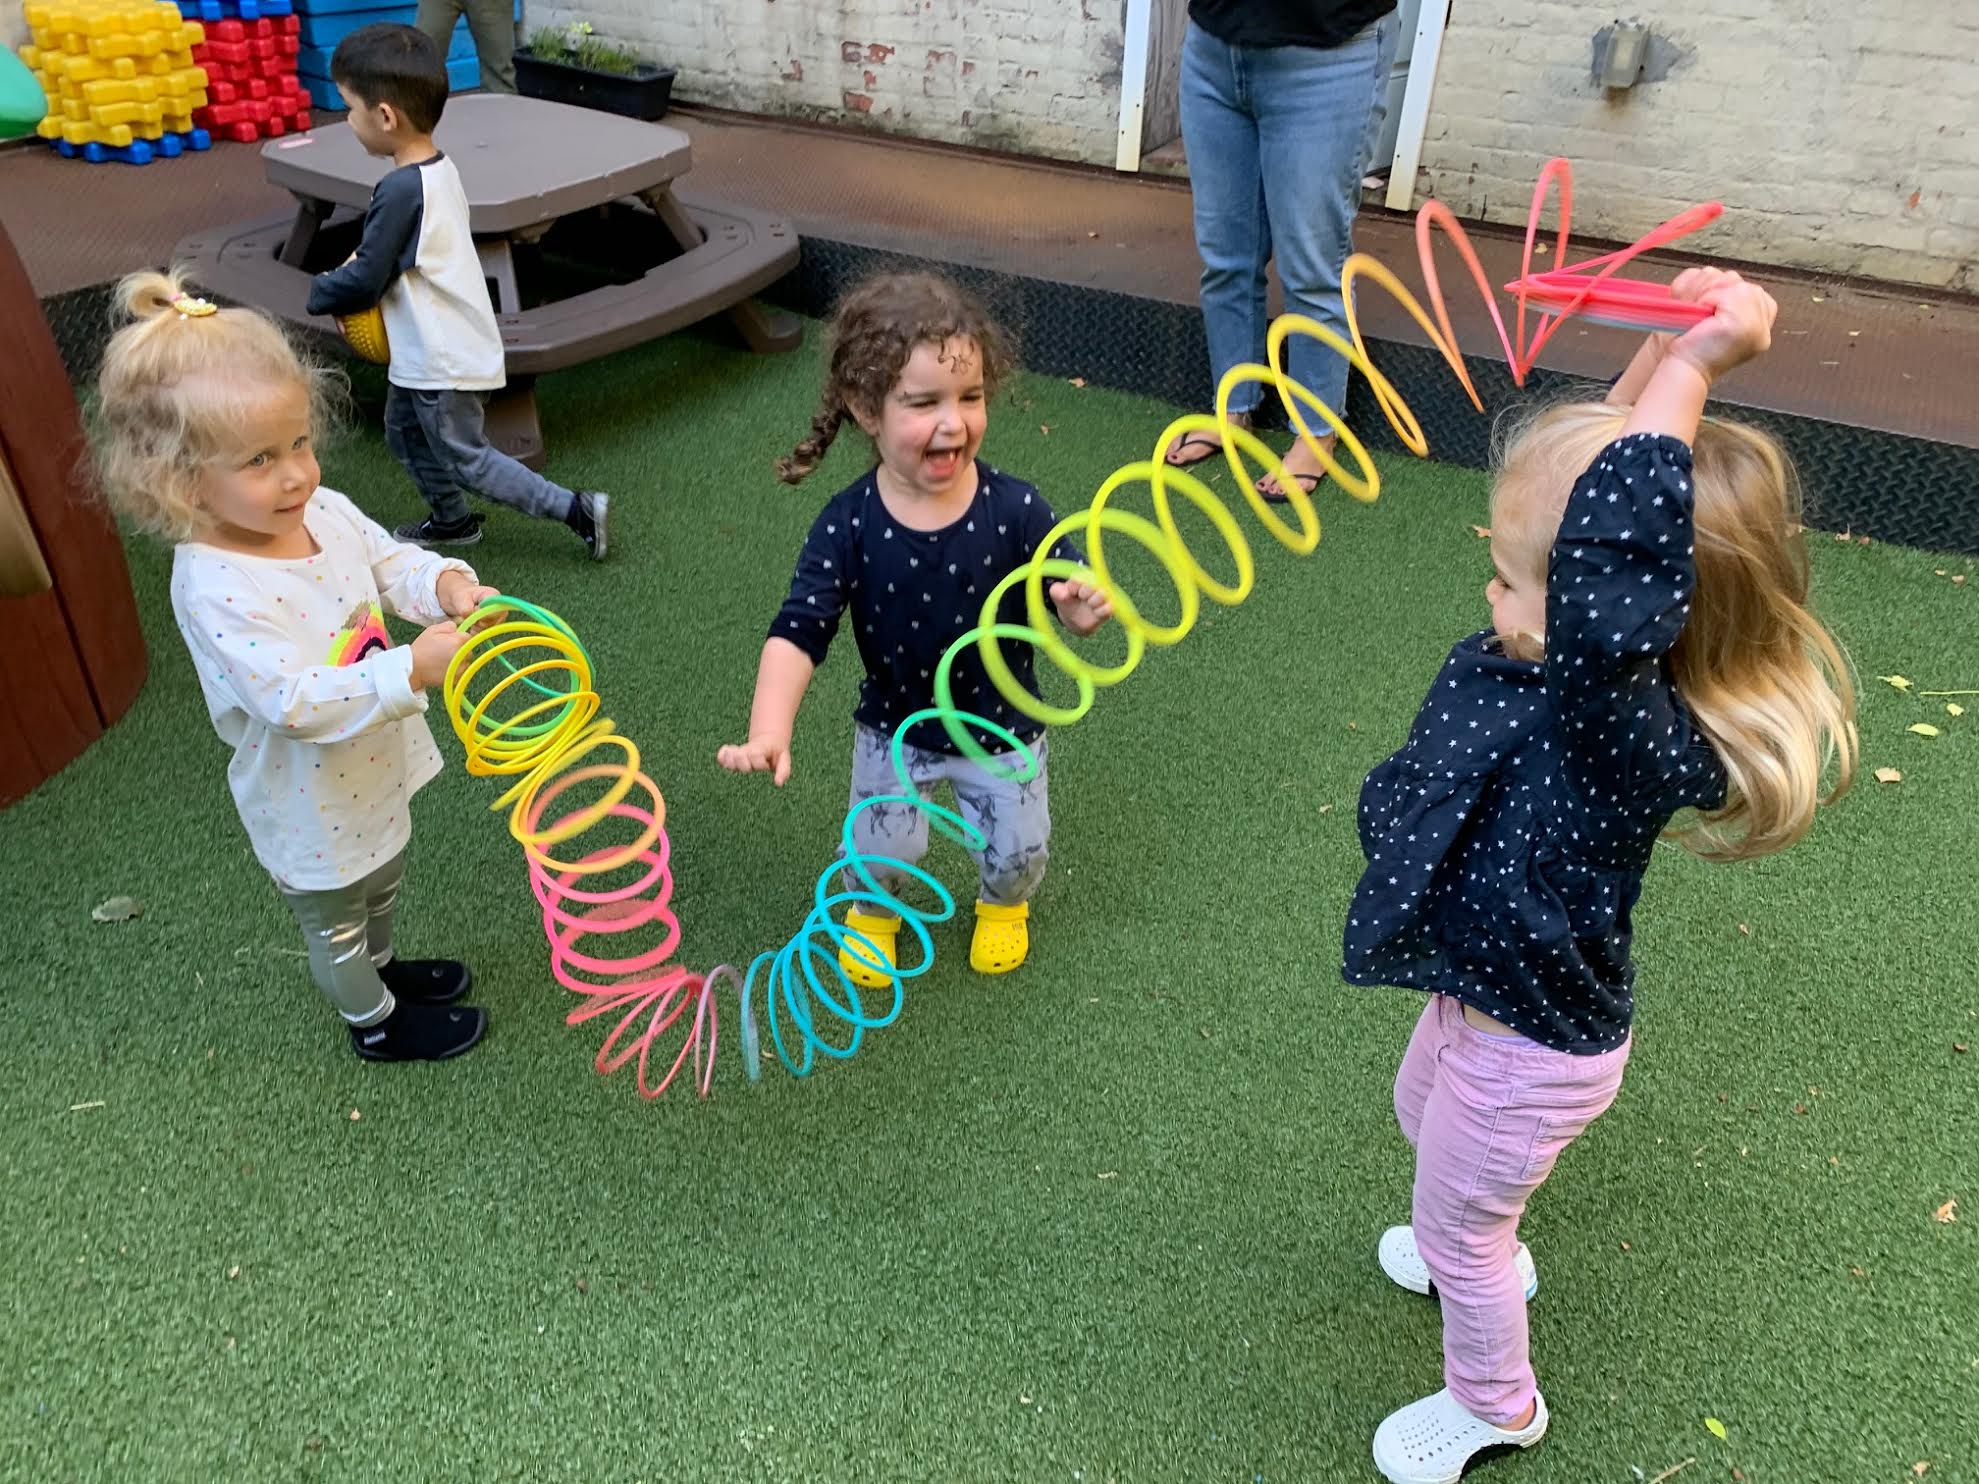 three young girls having fun with a very large slinky toy